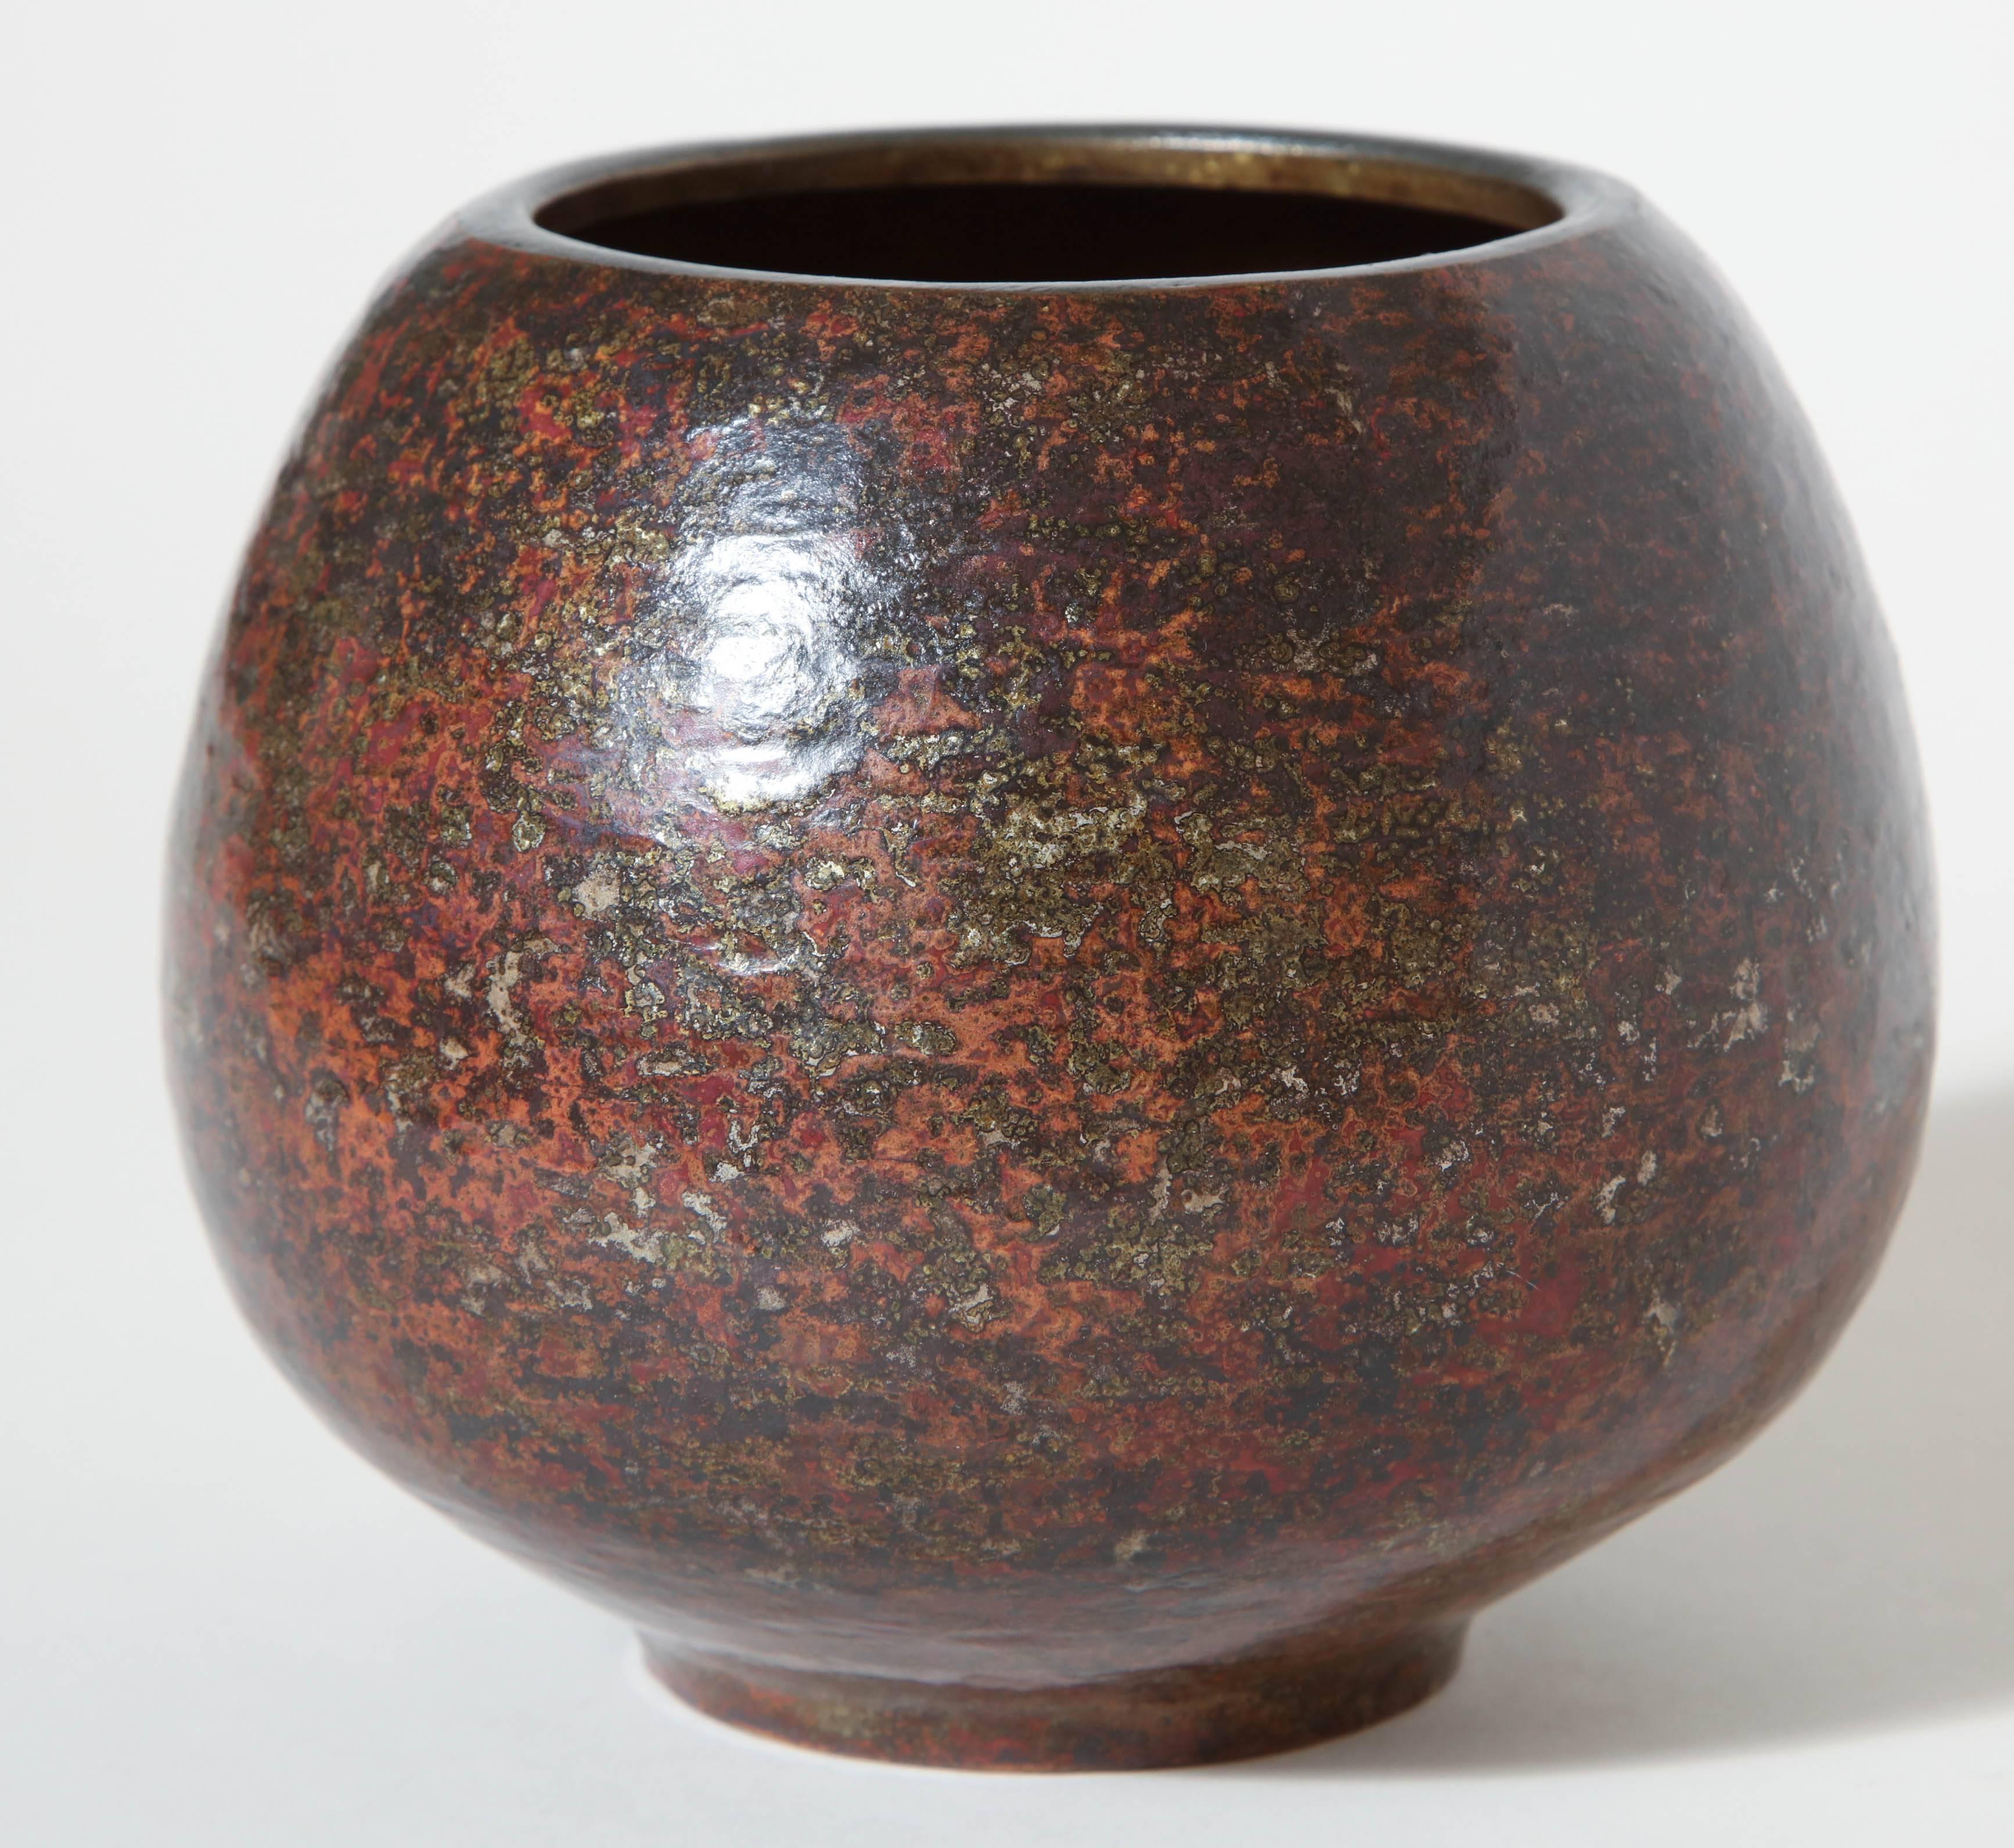 This ovoid vase with a wide annular collar has decoration made with a fired patina and inlays of silver on background, also patinated with fire, coral and gray anthracite. This gives an overall pebbled jasper appearance. 

Inscribed 